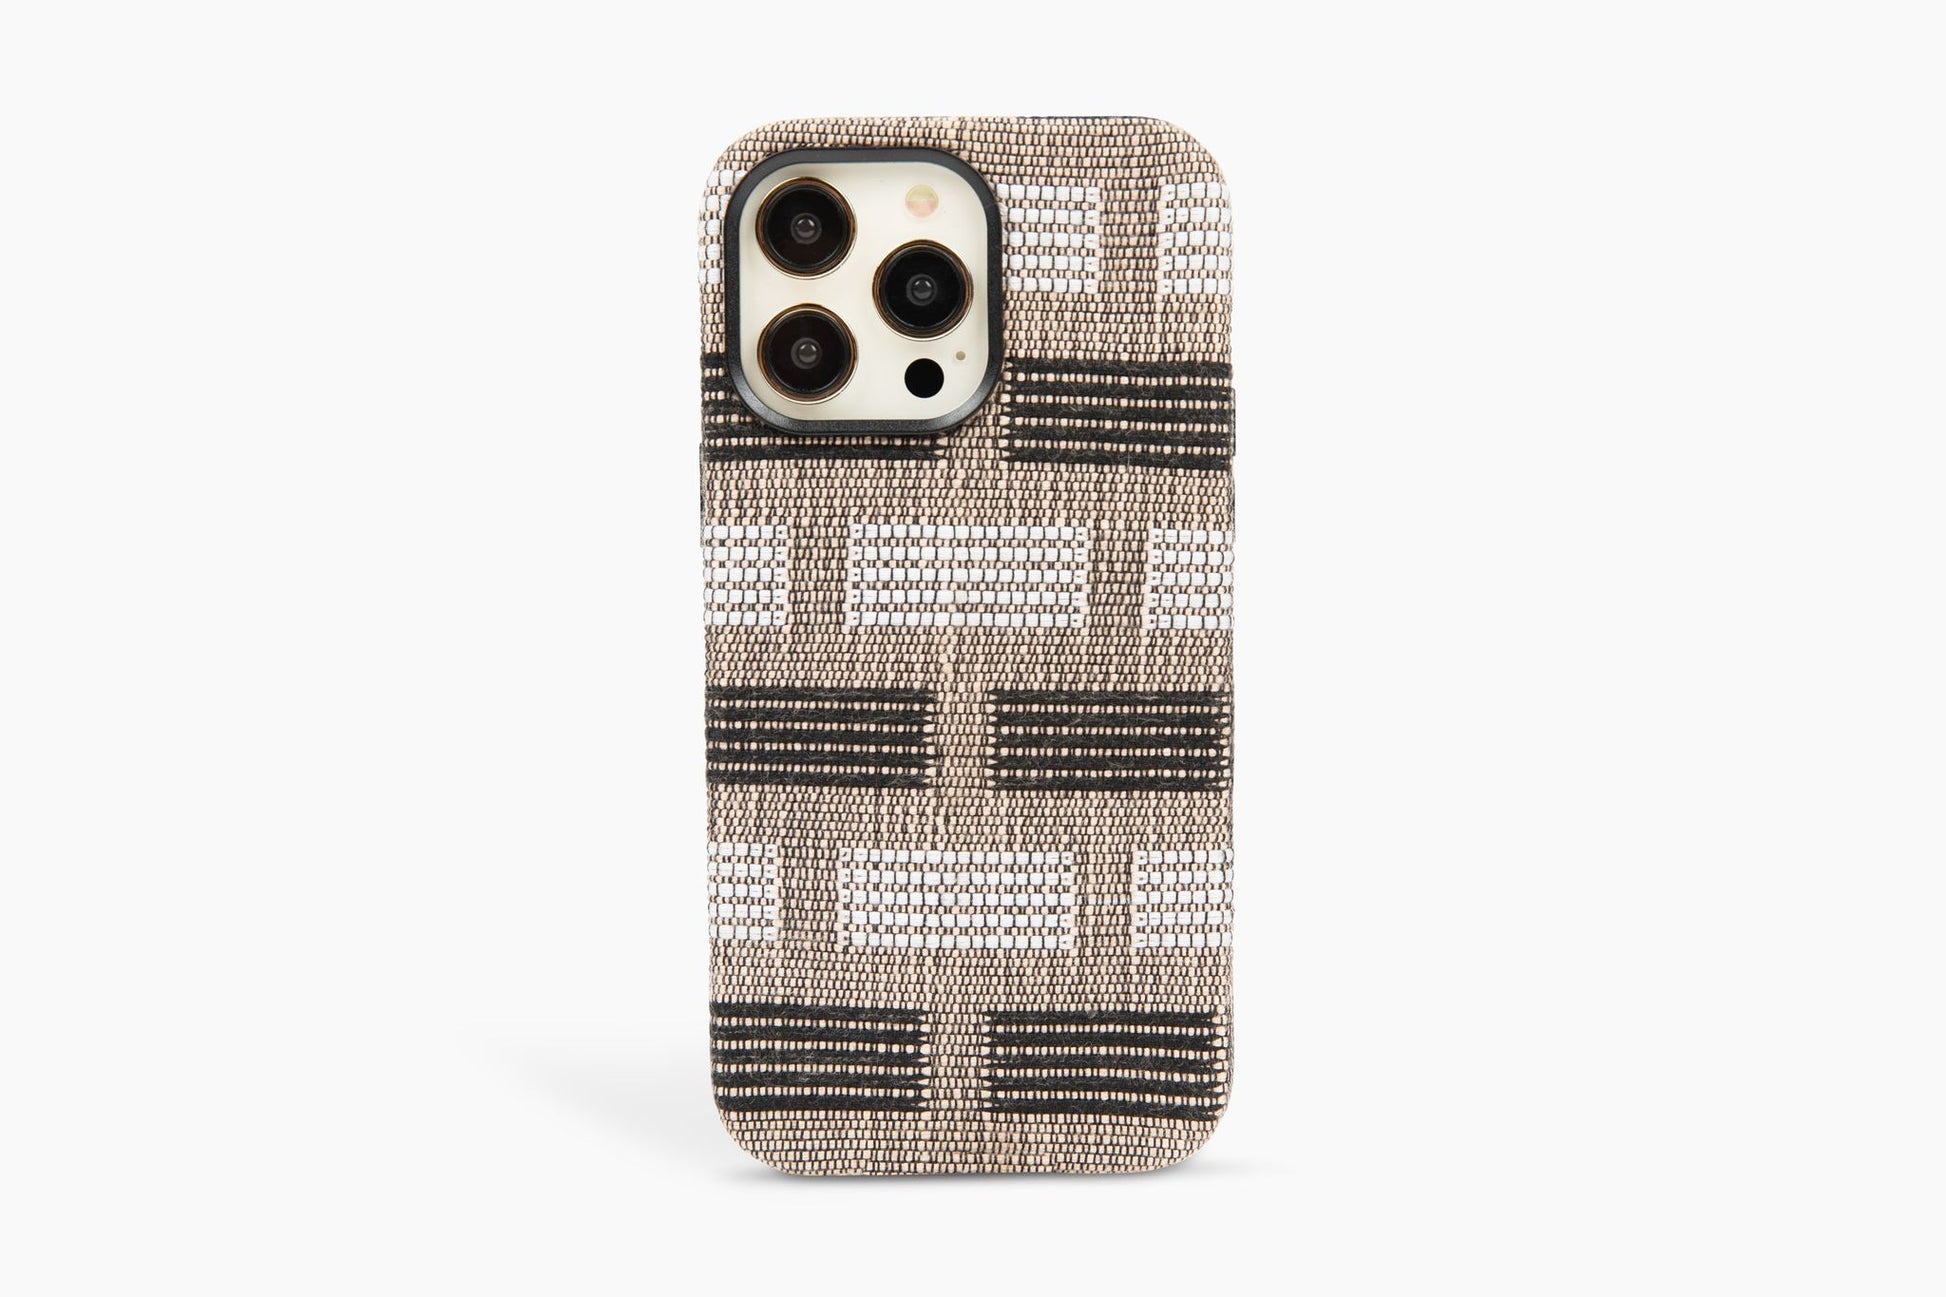 Benin Bands handwoven case in brown with black and white accents on a white background, compatible with iPhone 12/13/14 Pro Max.